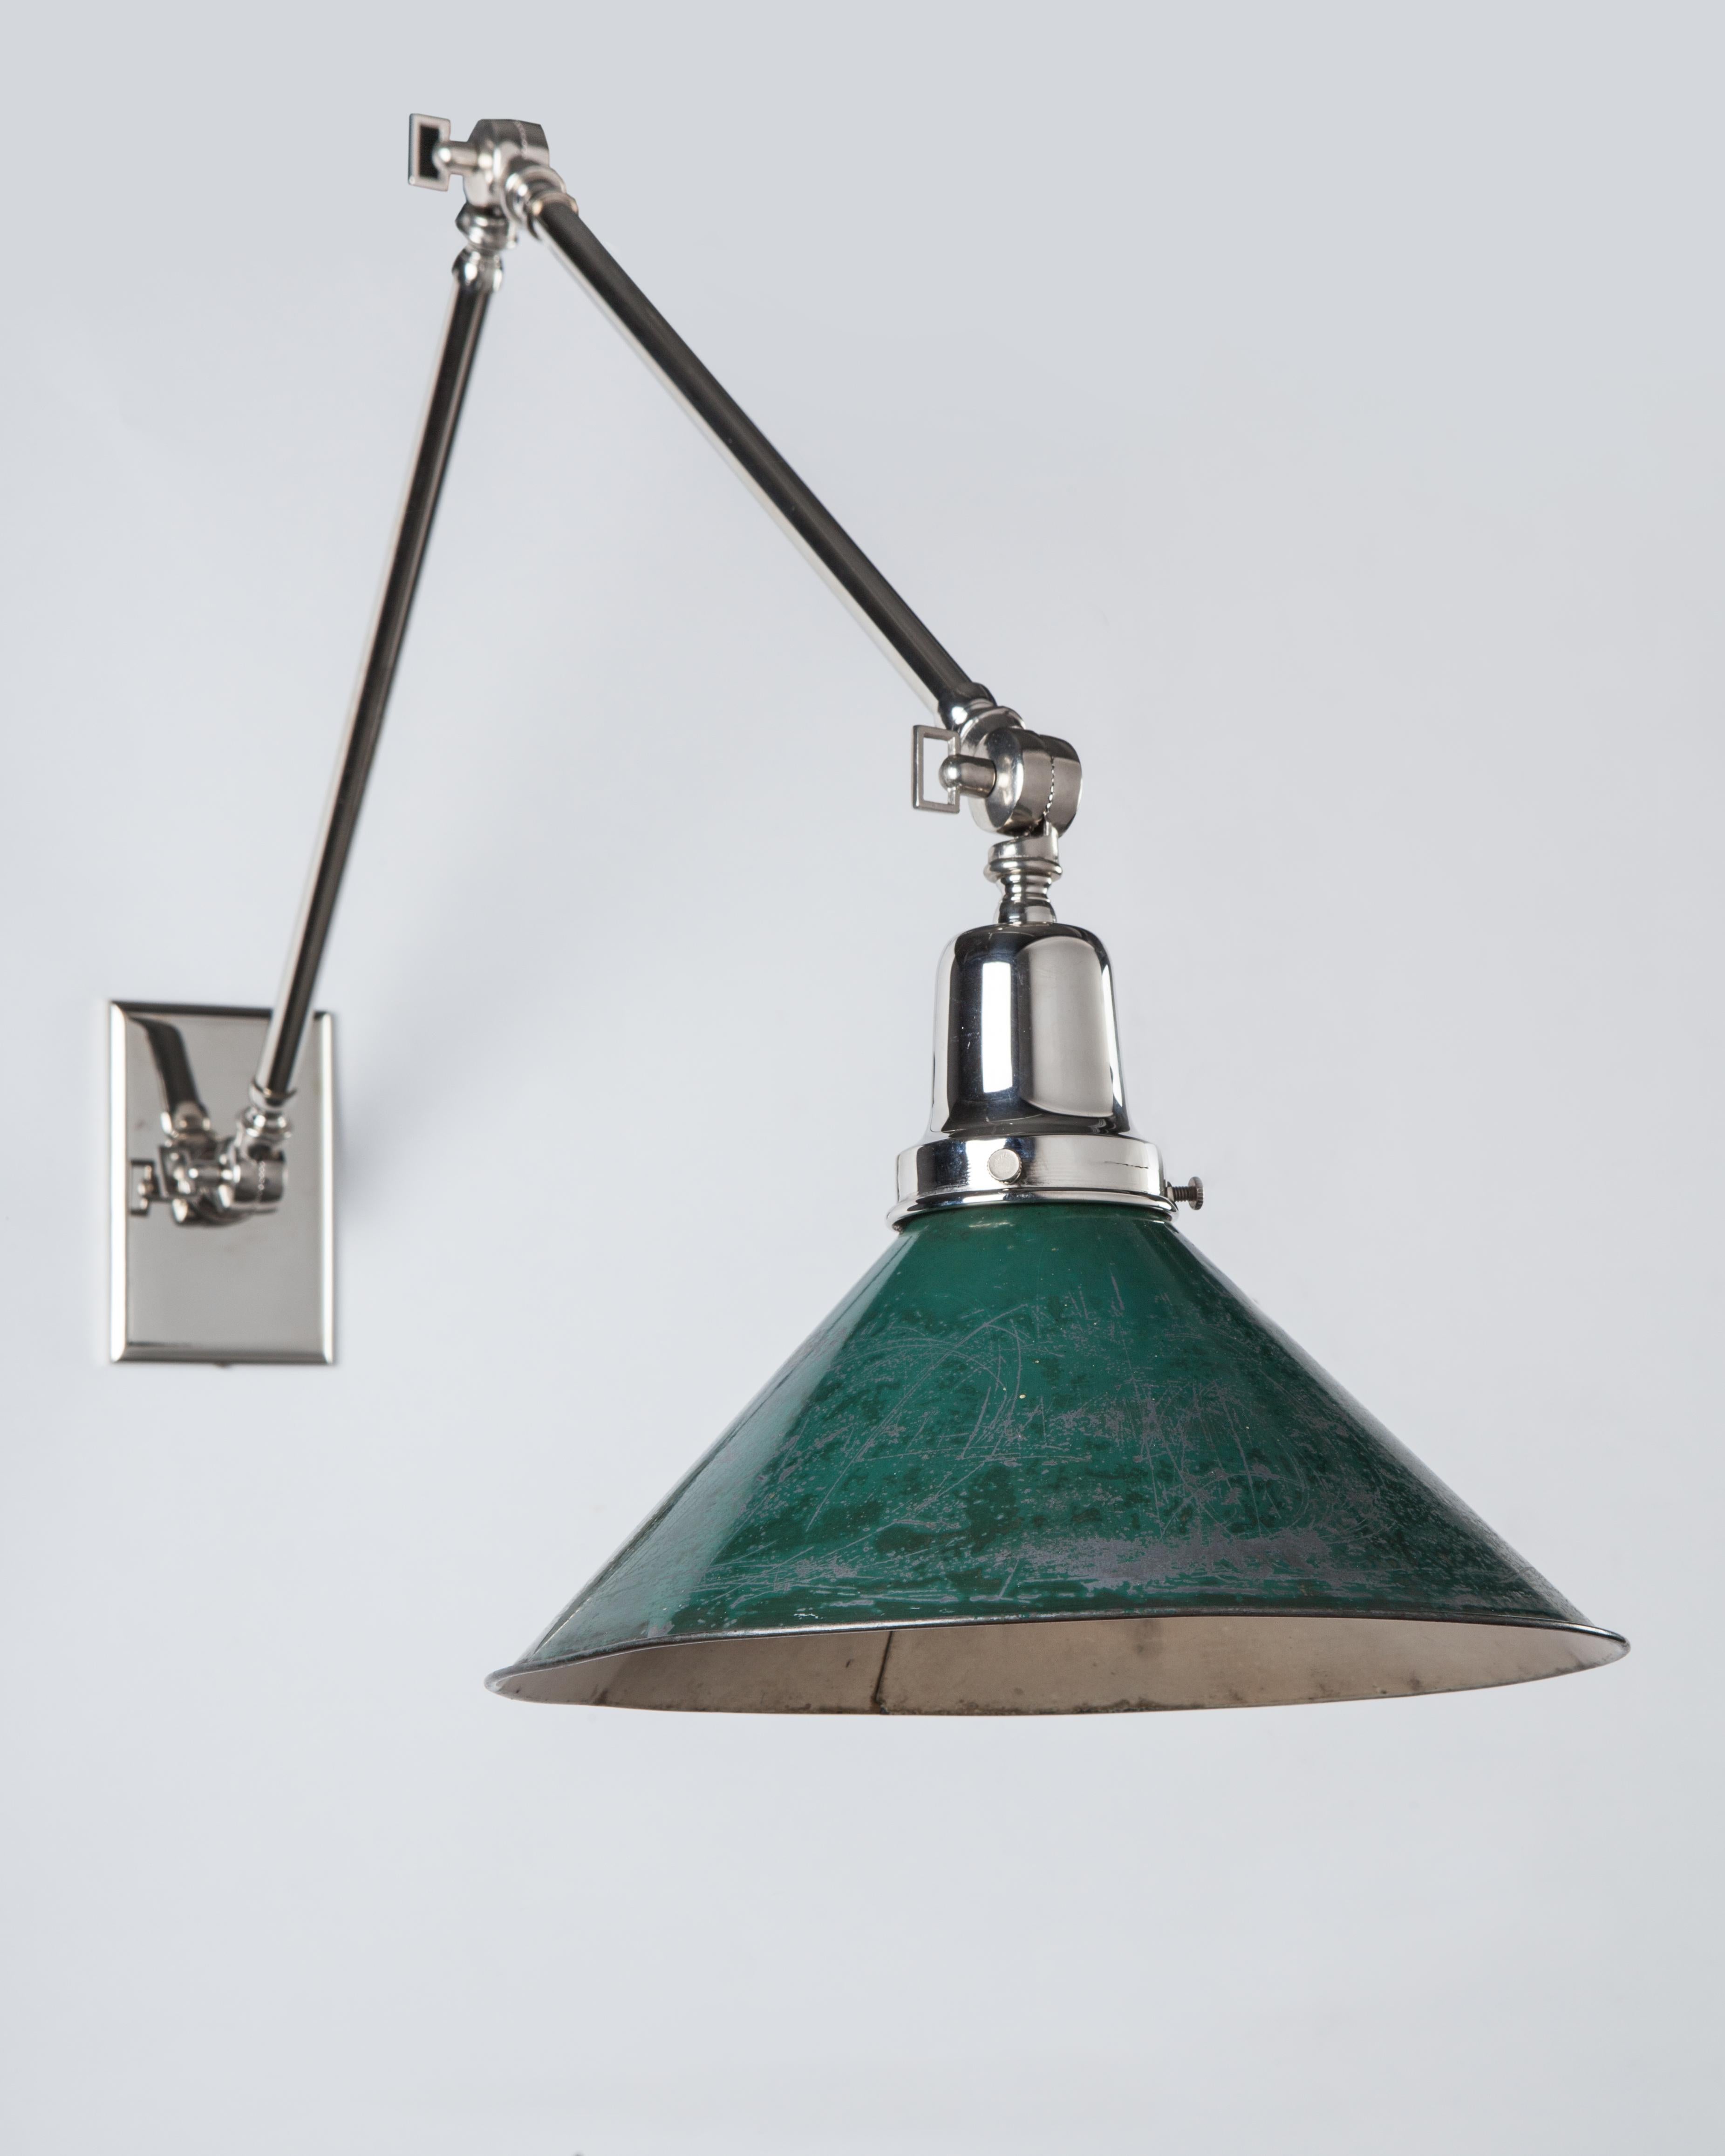 American Articulated Sconce with Antique Industrial Green Shade, Circa 1910